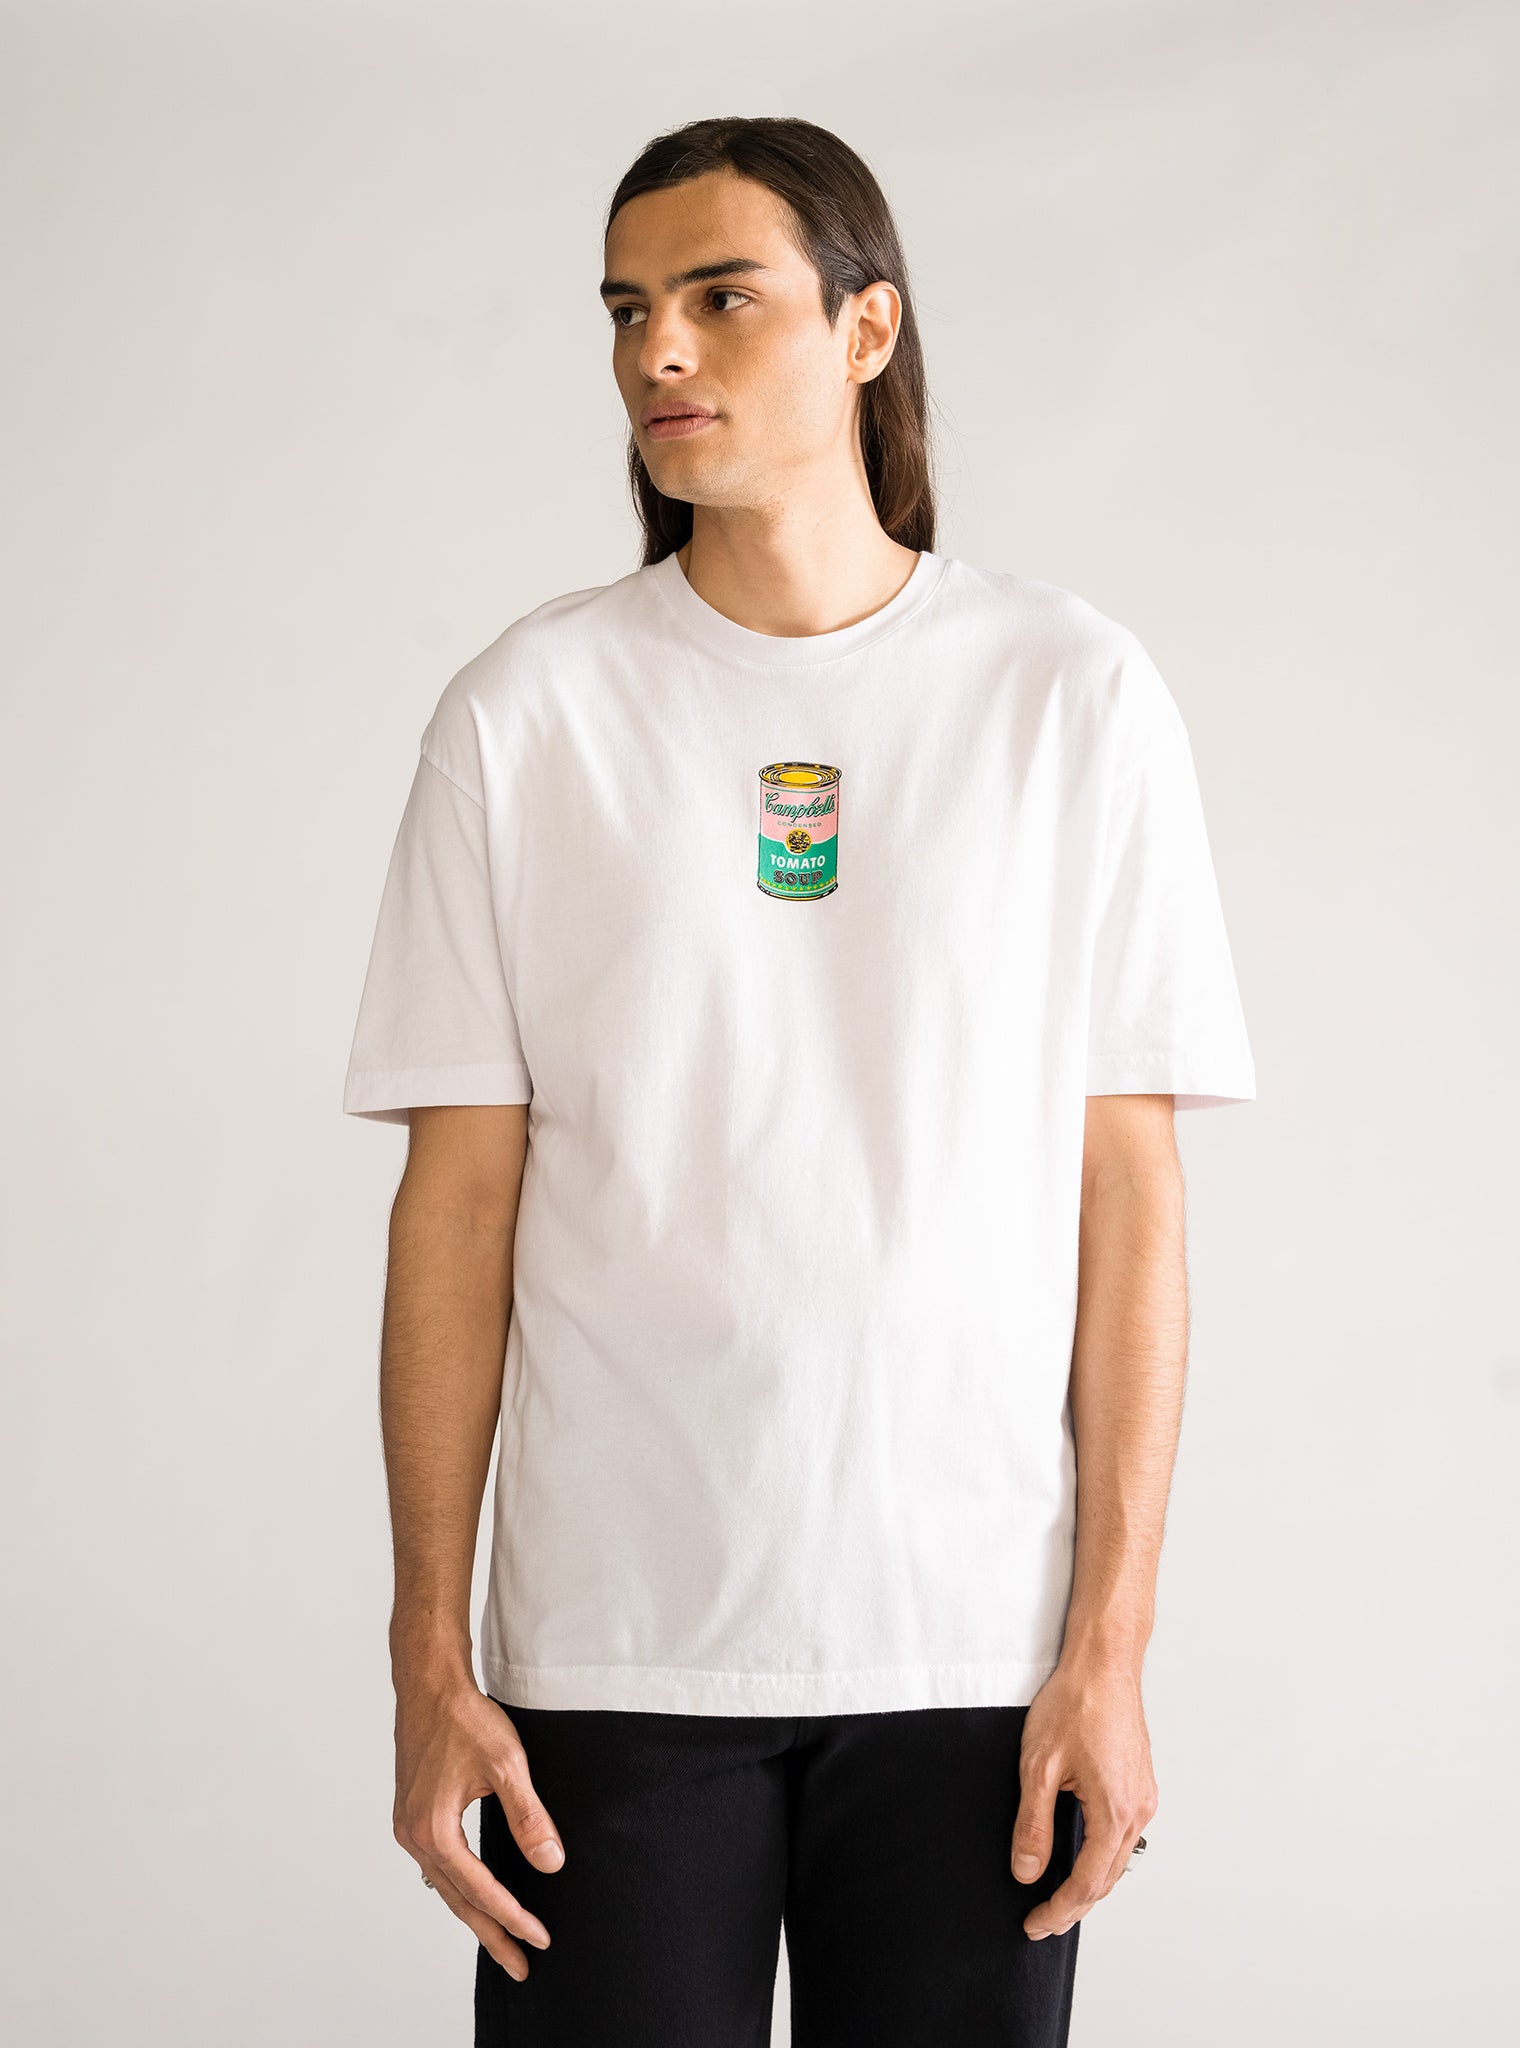 Can I? Oversize T-Shirt, Blanco